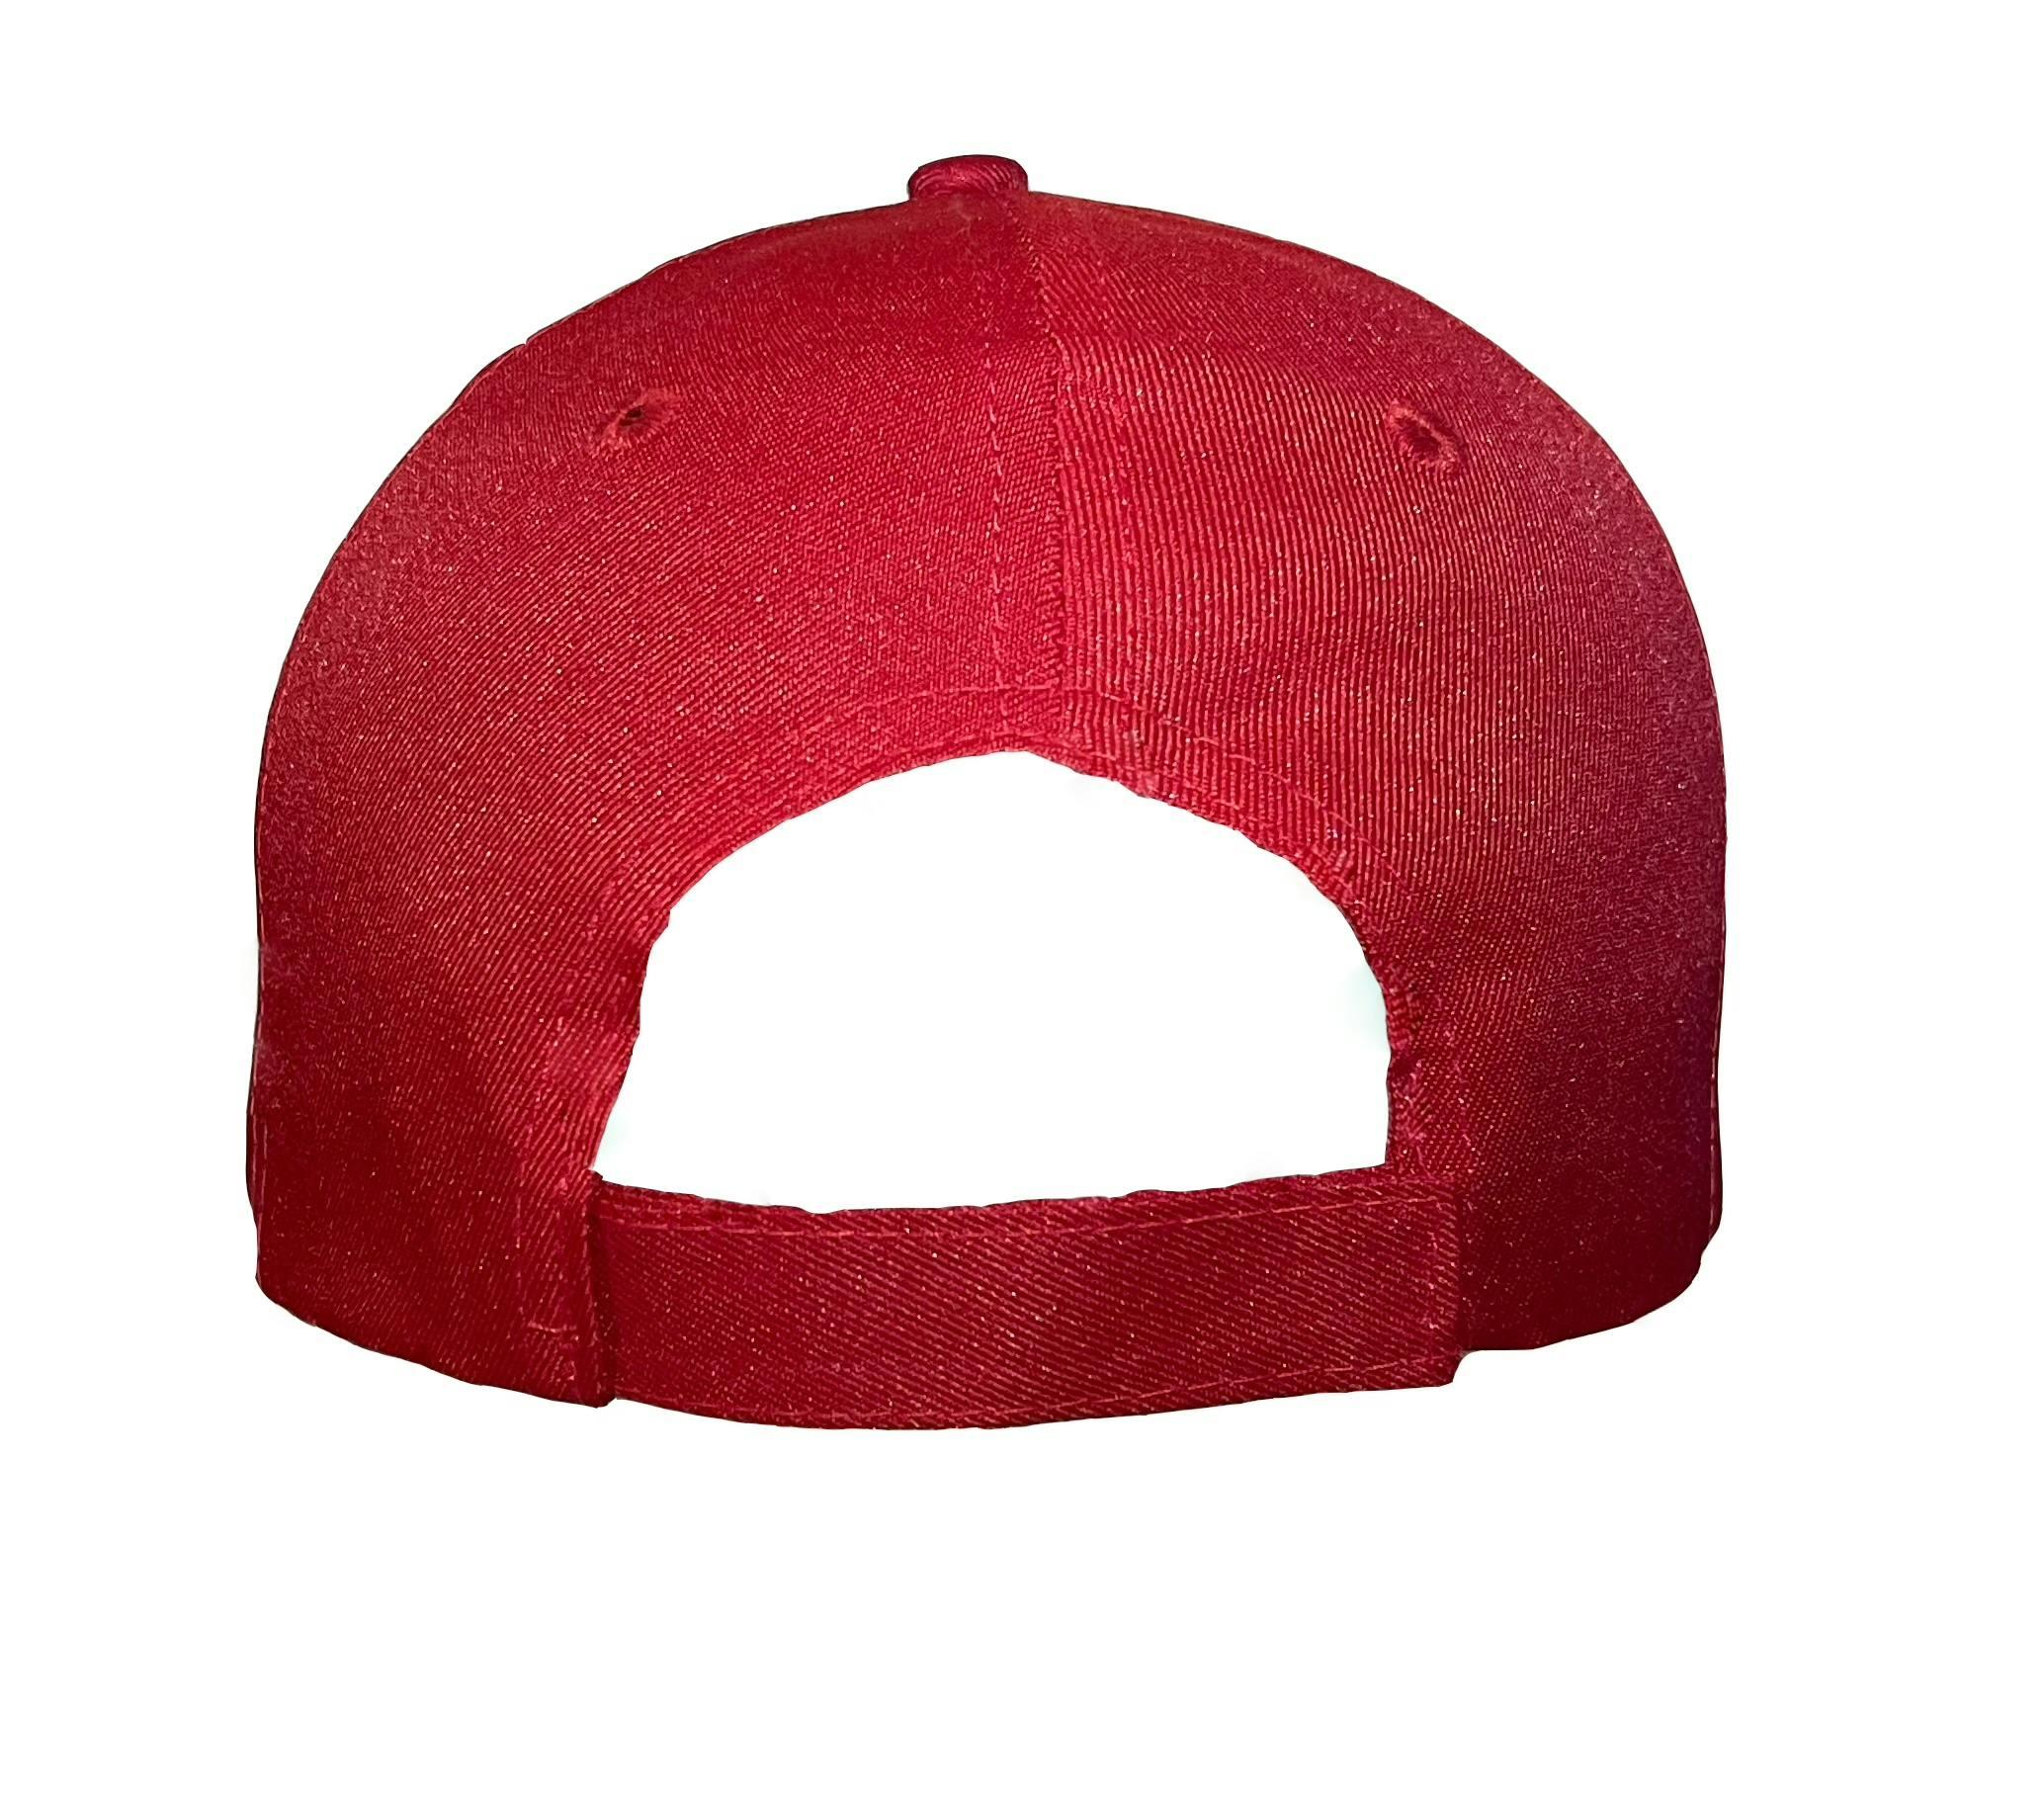 5 PANEL POLY TWILL CAP WITH VELCRO CLOSURE